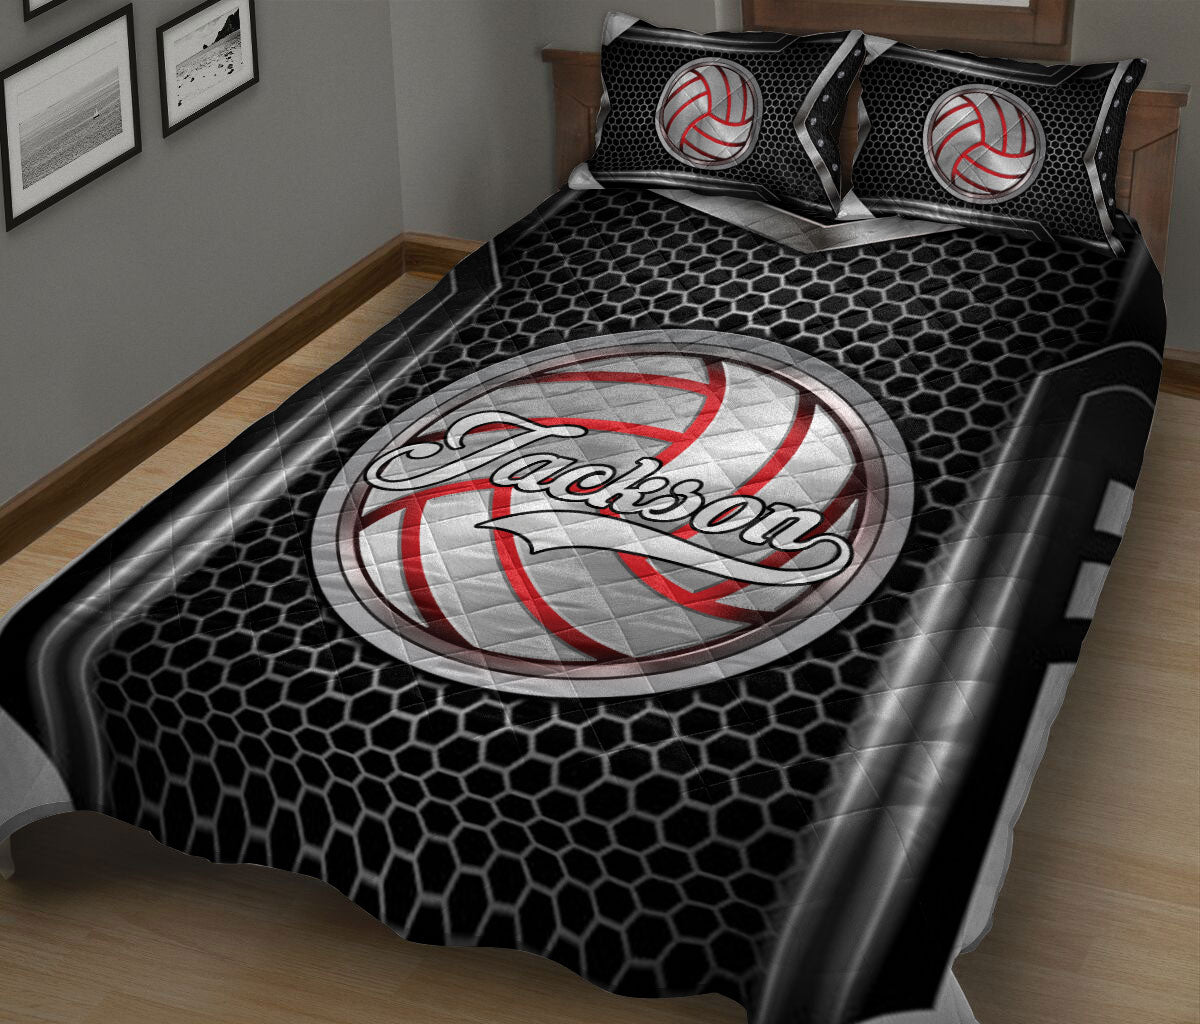 Ohaprints-Quilt-Bed-Set-Pillowcase-Volleyball-Ball-Gift-For-Sport-Lover-B&W-Pattern-Custom-Personalized-Name-Blanket-Bedspread-Bedding-769-King (90'' x 100'')